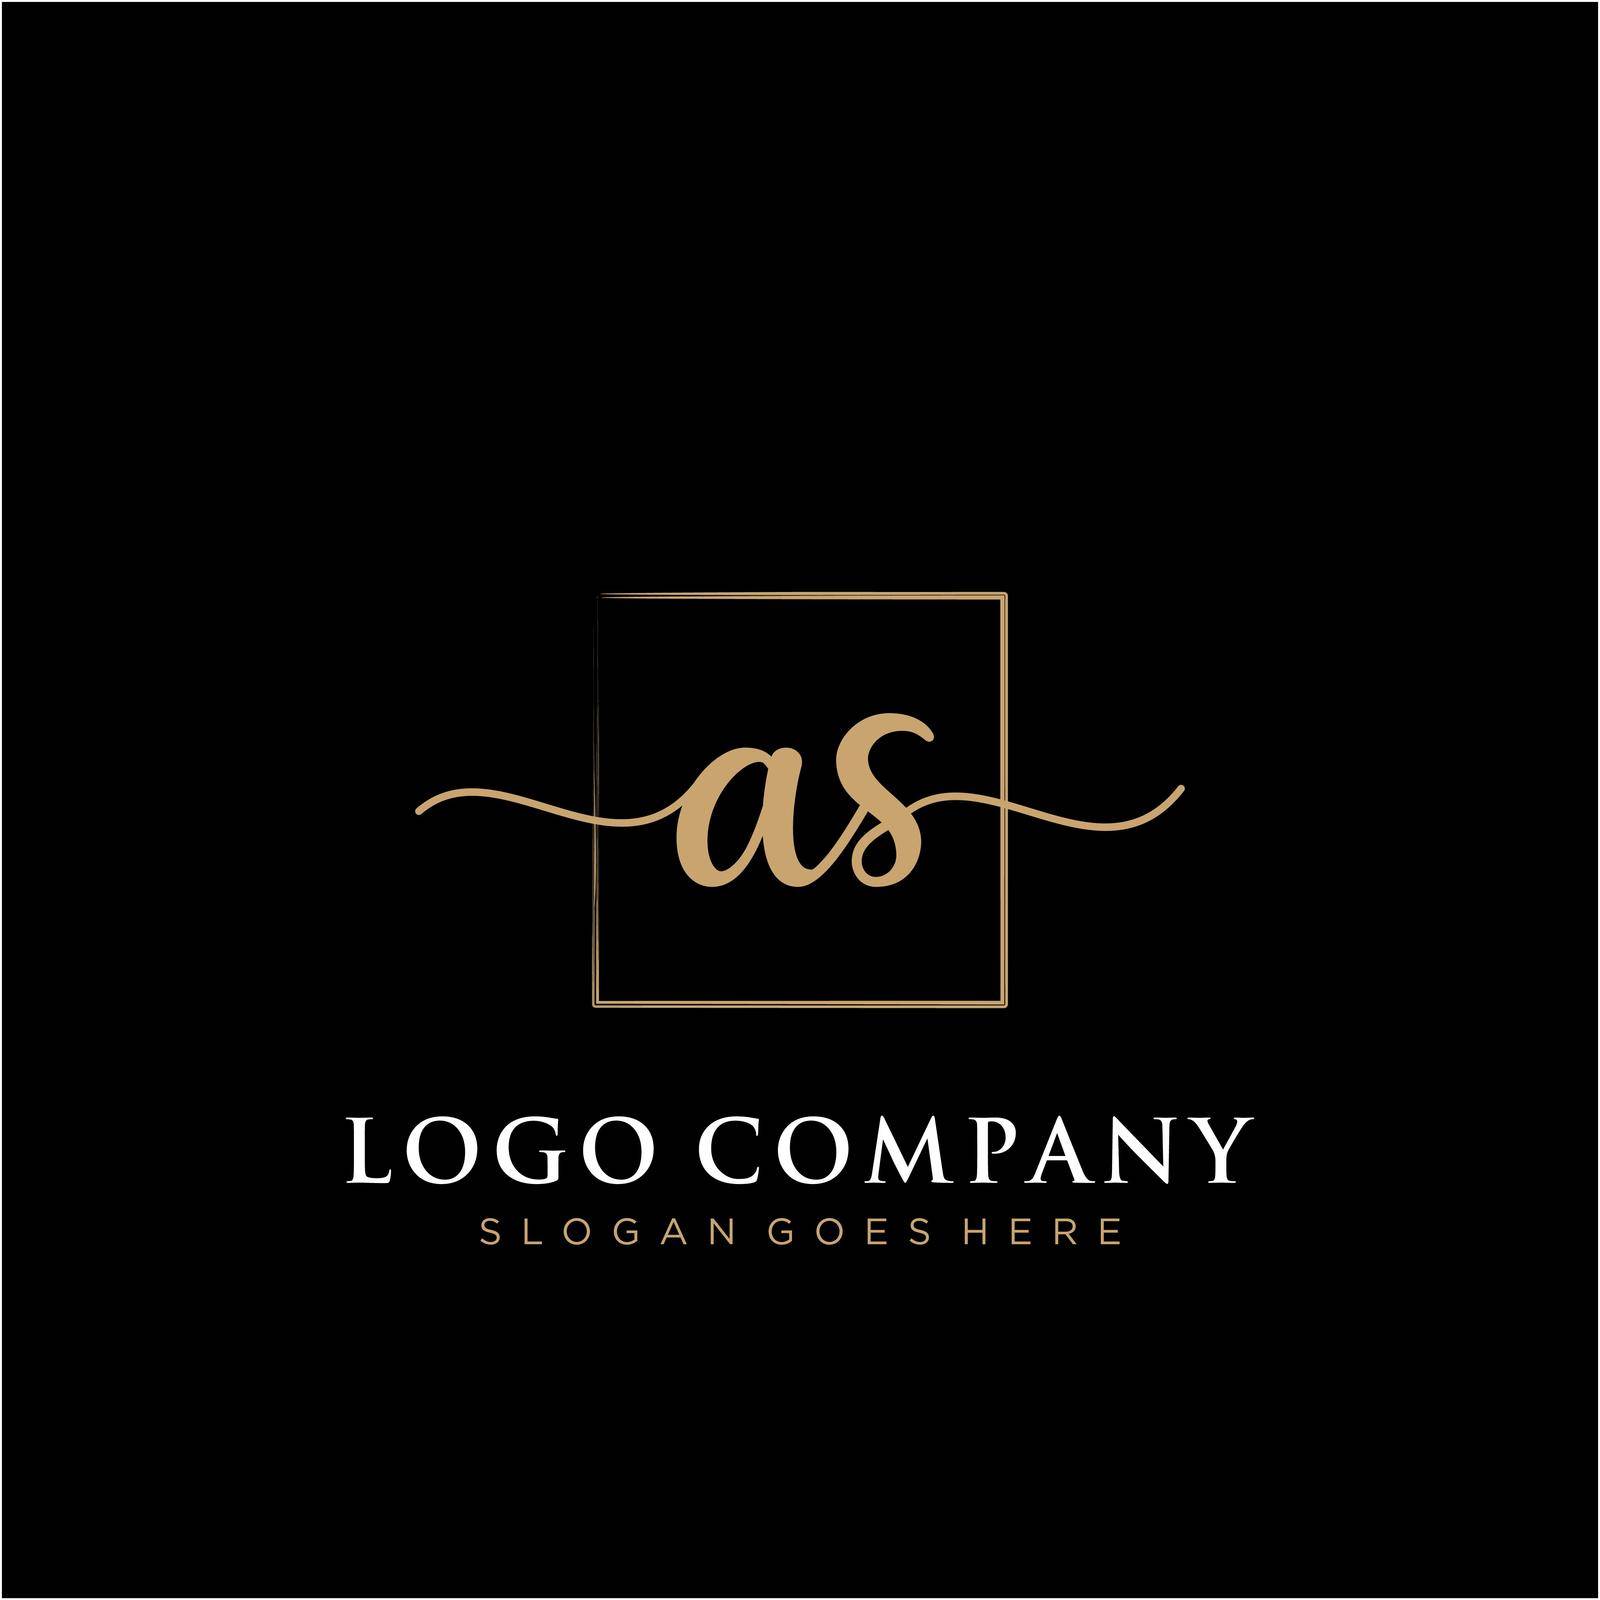 AS Initial handwriting logo with rectangle template vector by liaanniesatul